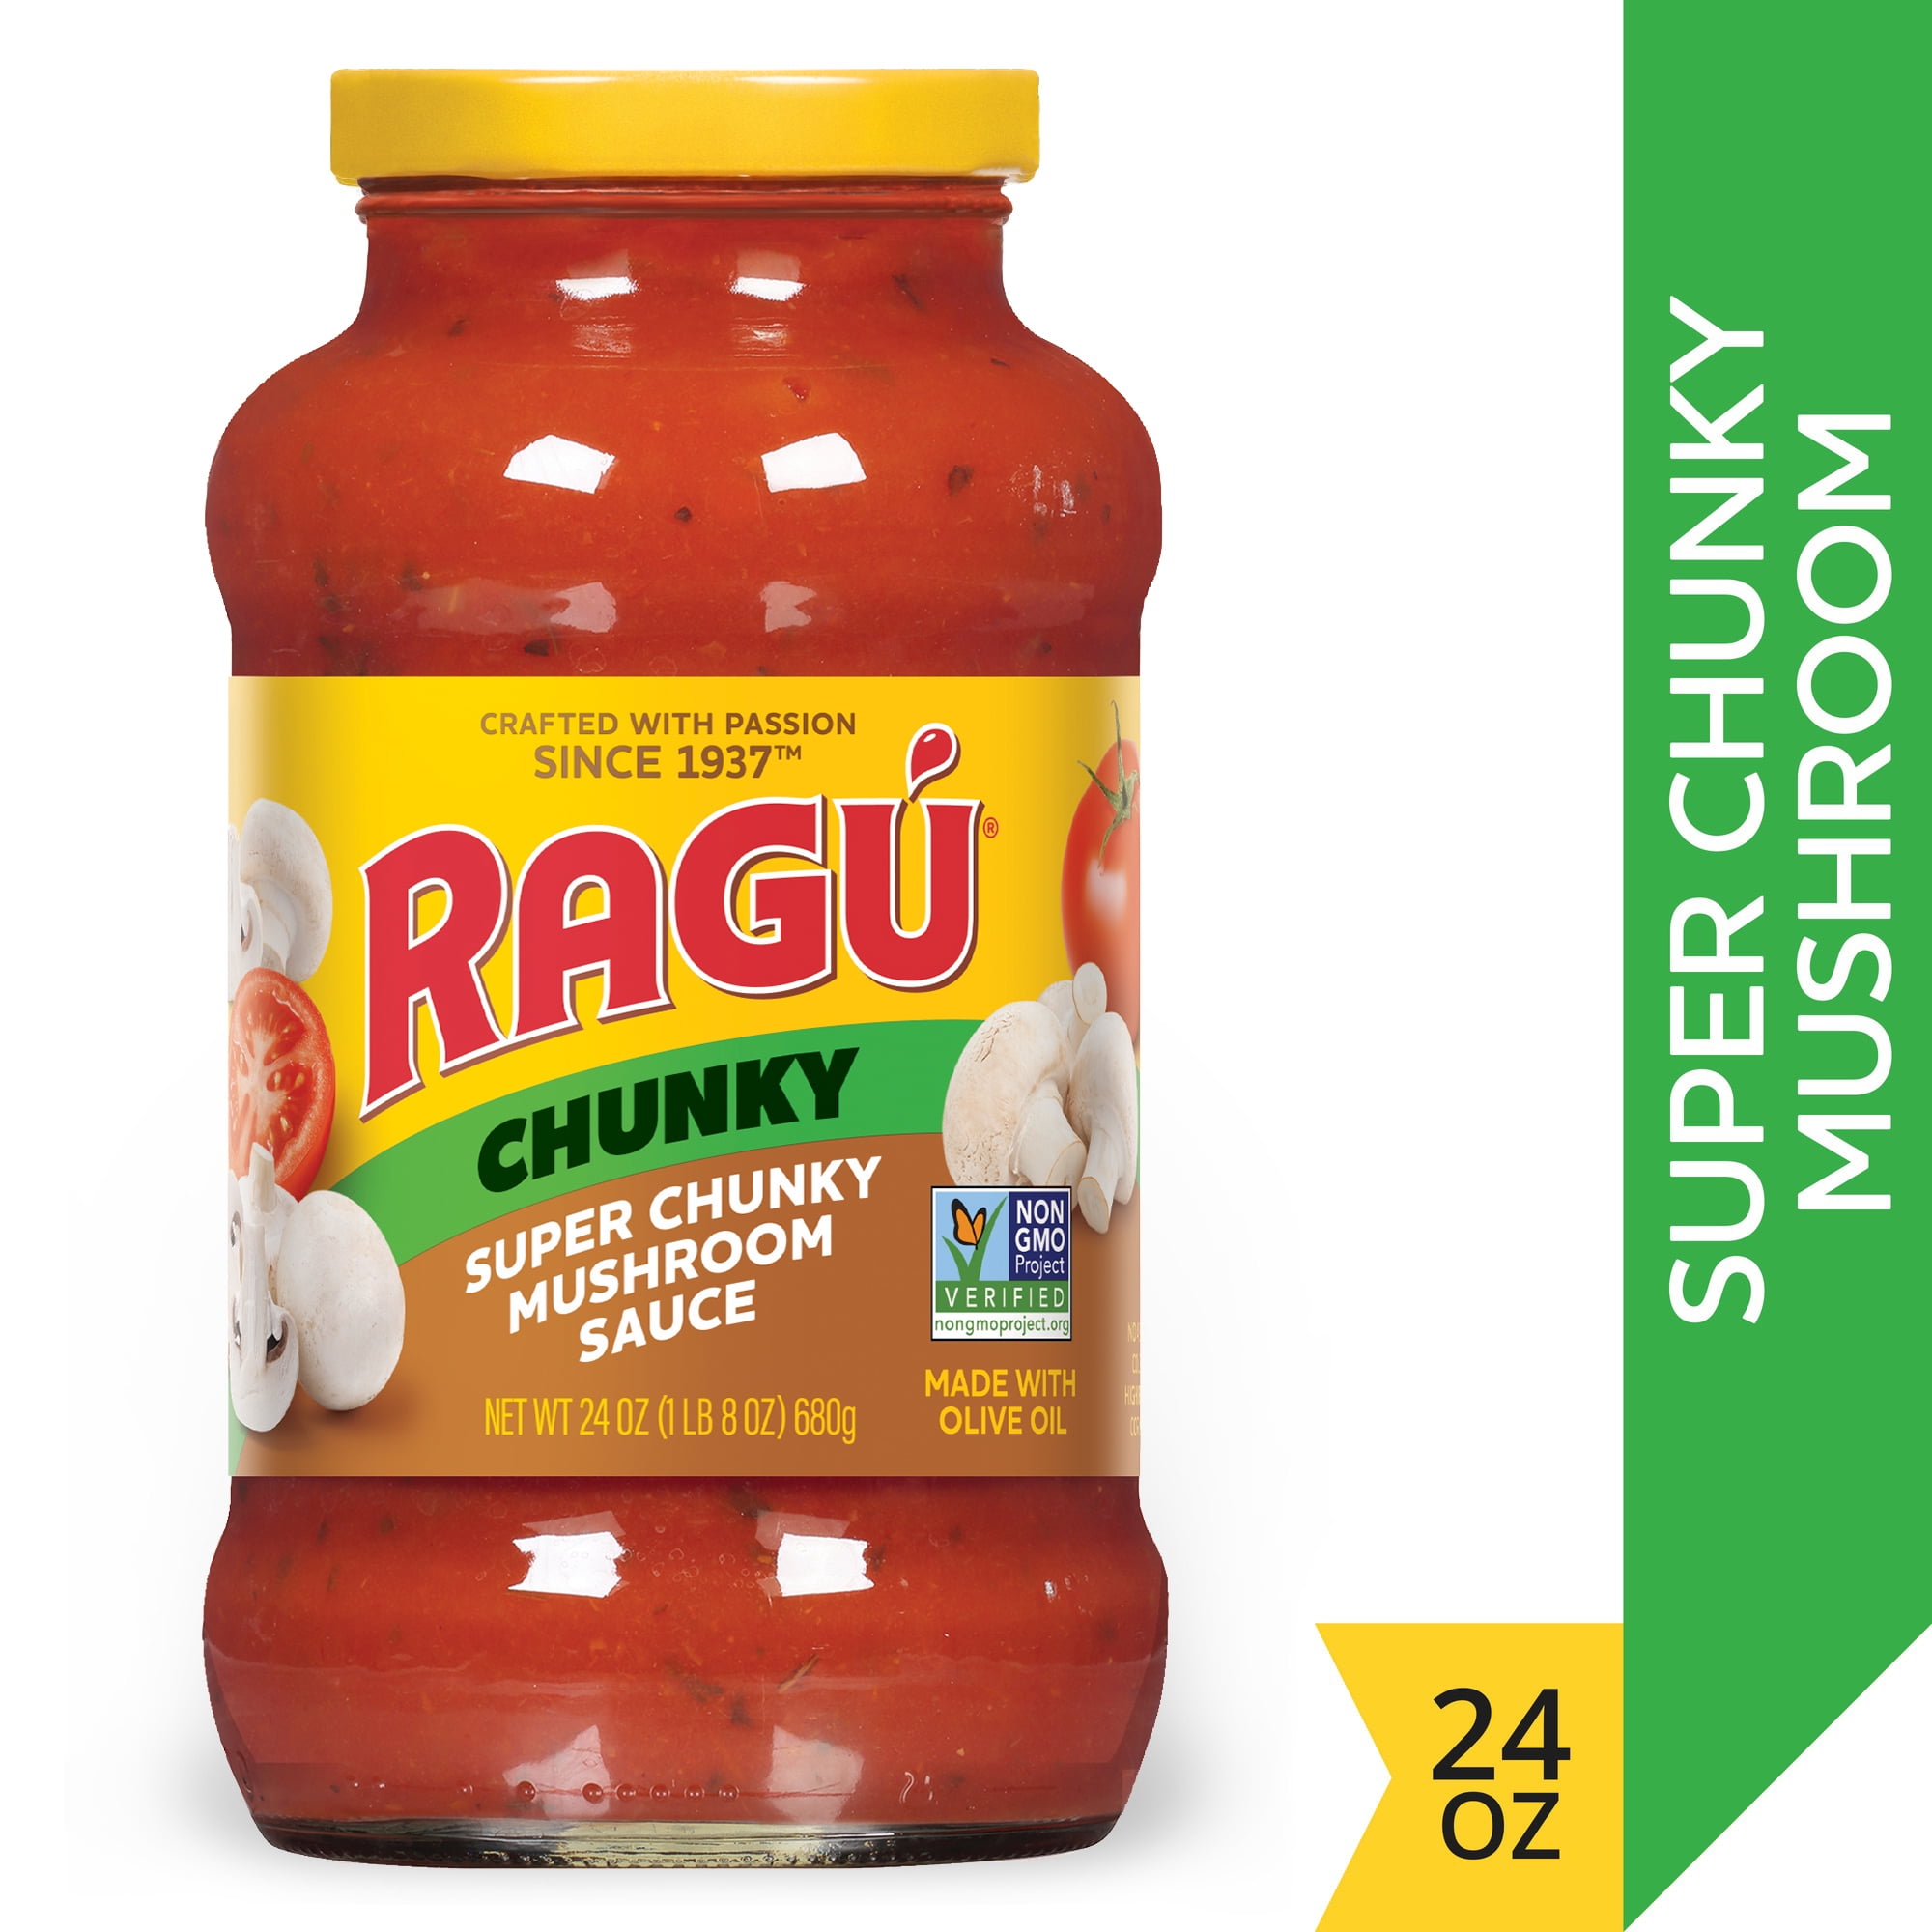 Ragu Chunky Super Chunky Mushroom Pasta Sauce with Hearty Mushrooms, Diced Tomatoes, and Italian Herbs and Spices, 24 OZ